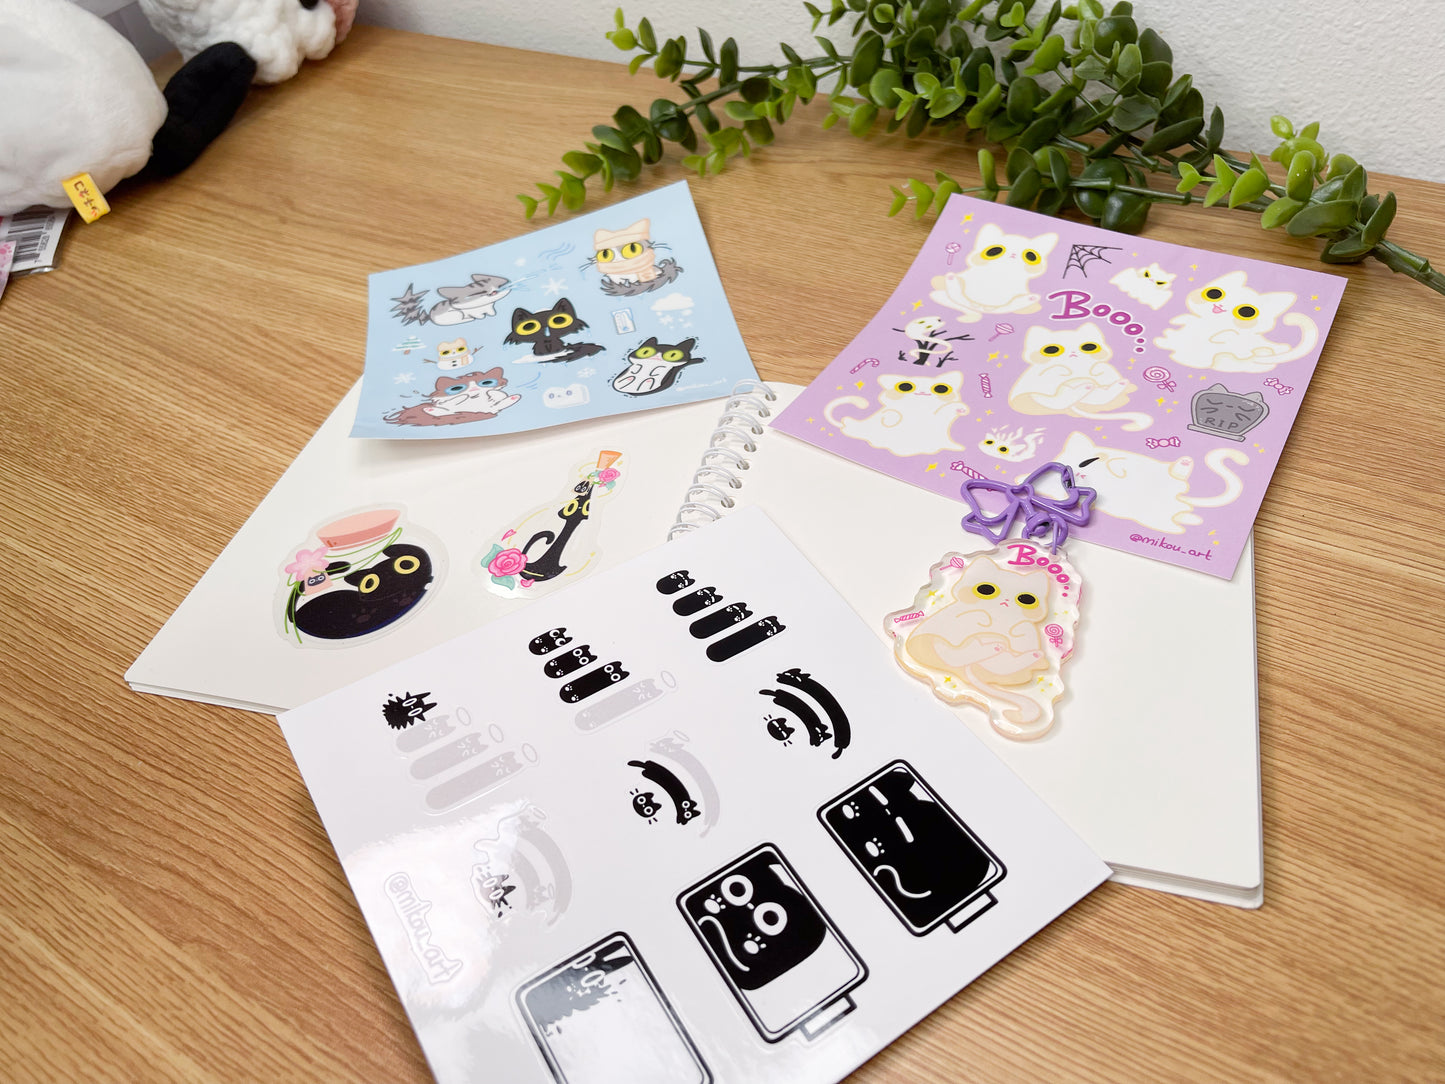 Sticker Sheet | Low Battery Mode Cat | 5.5x5.5 inch | Waterproof, and Fade-Resistant | Gift for Cat Lovers | Mikou Original Art